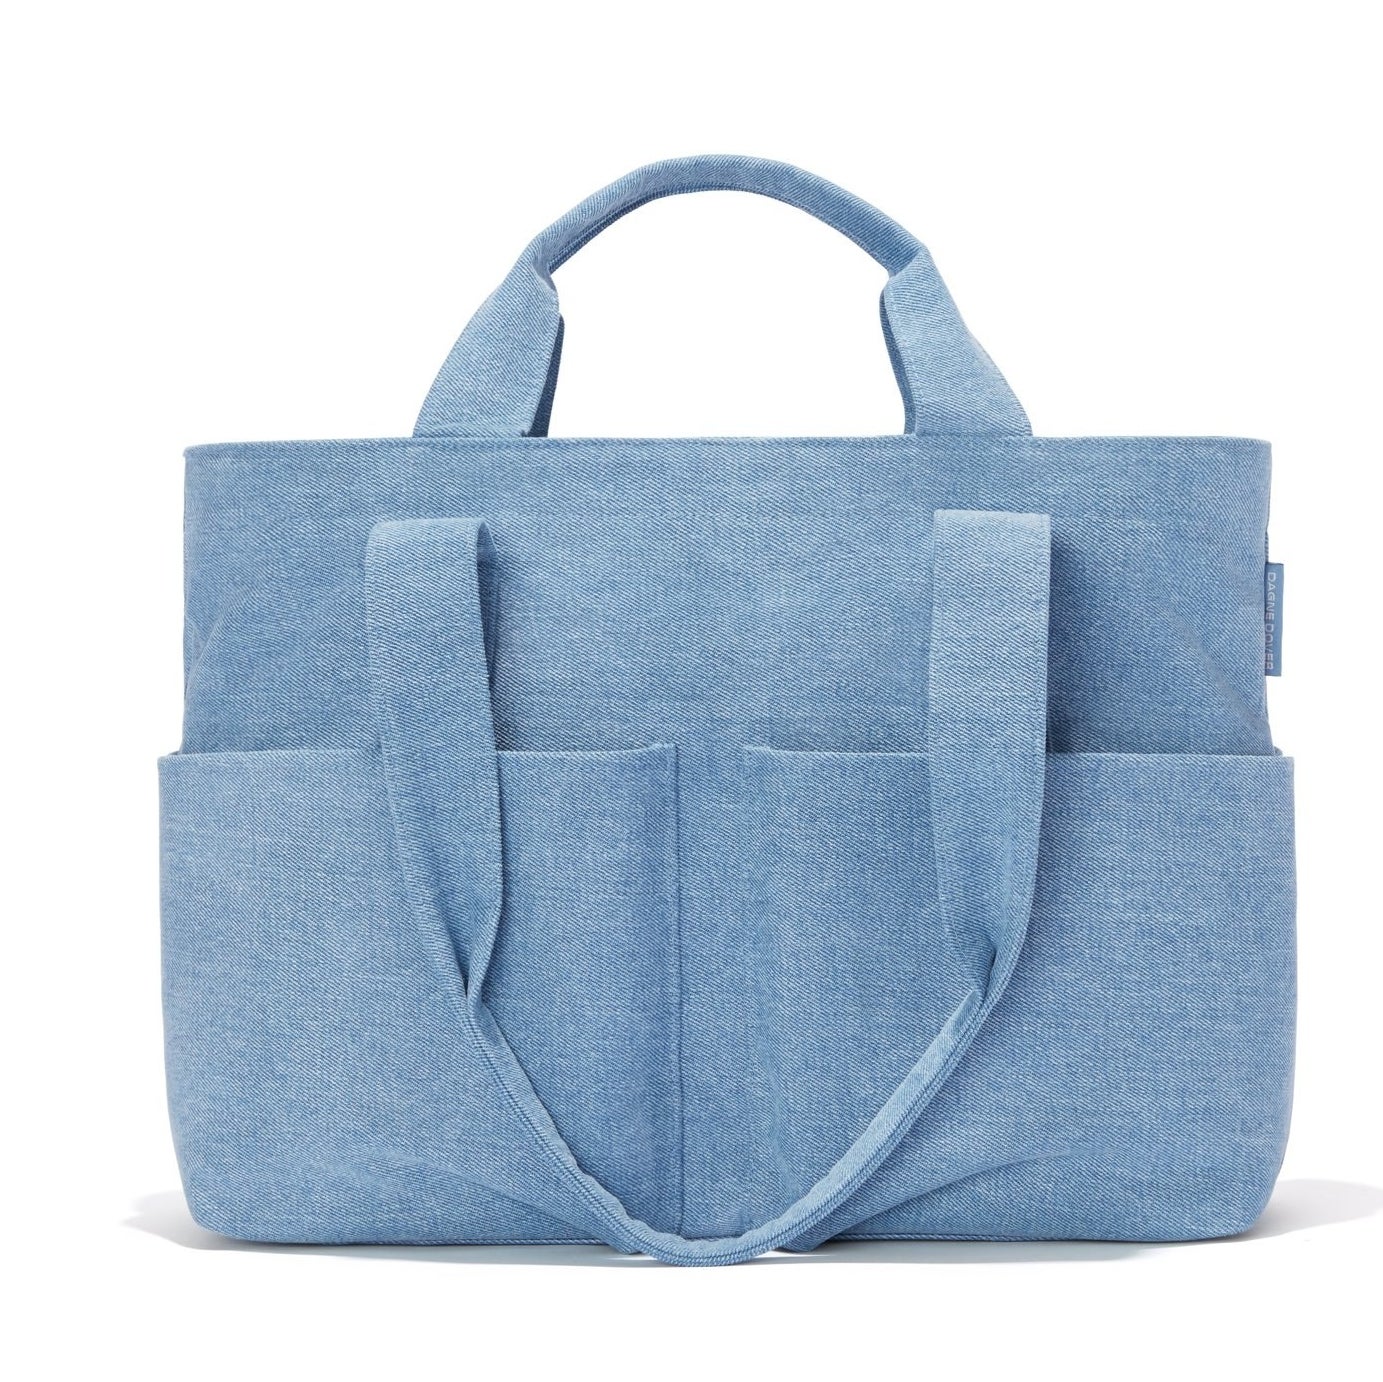 light blue tote with pockets